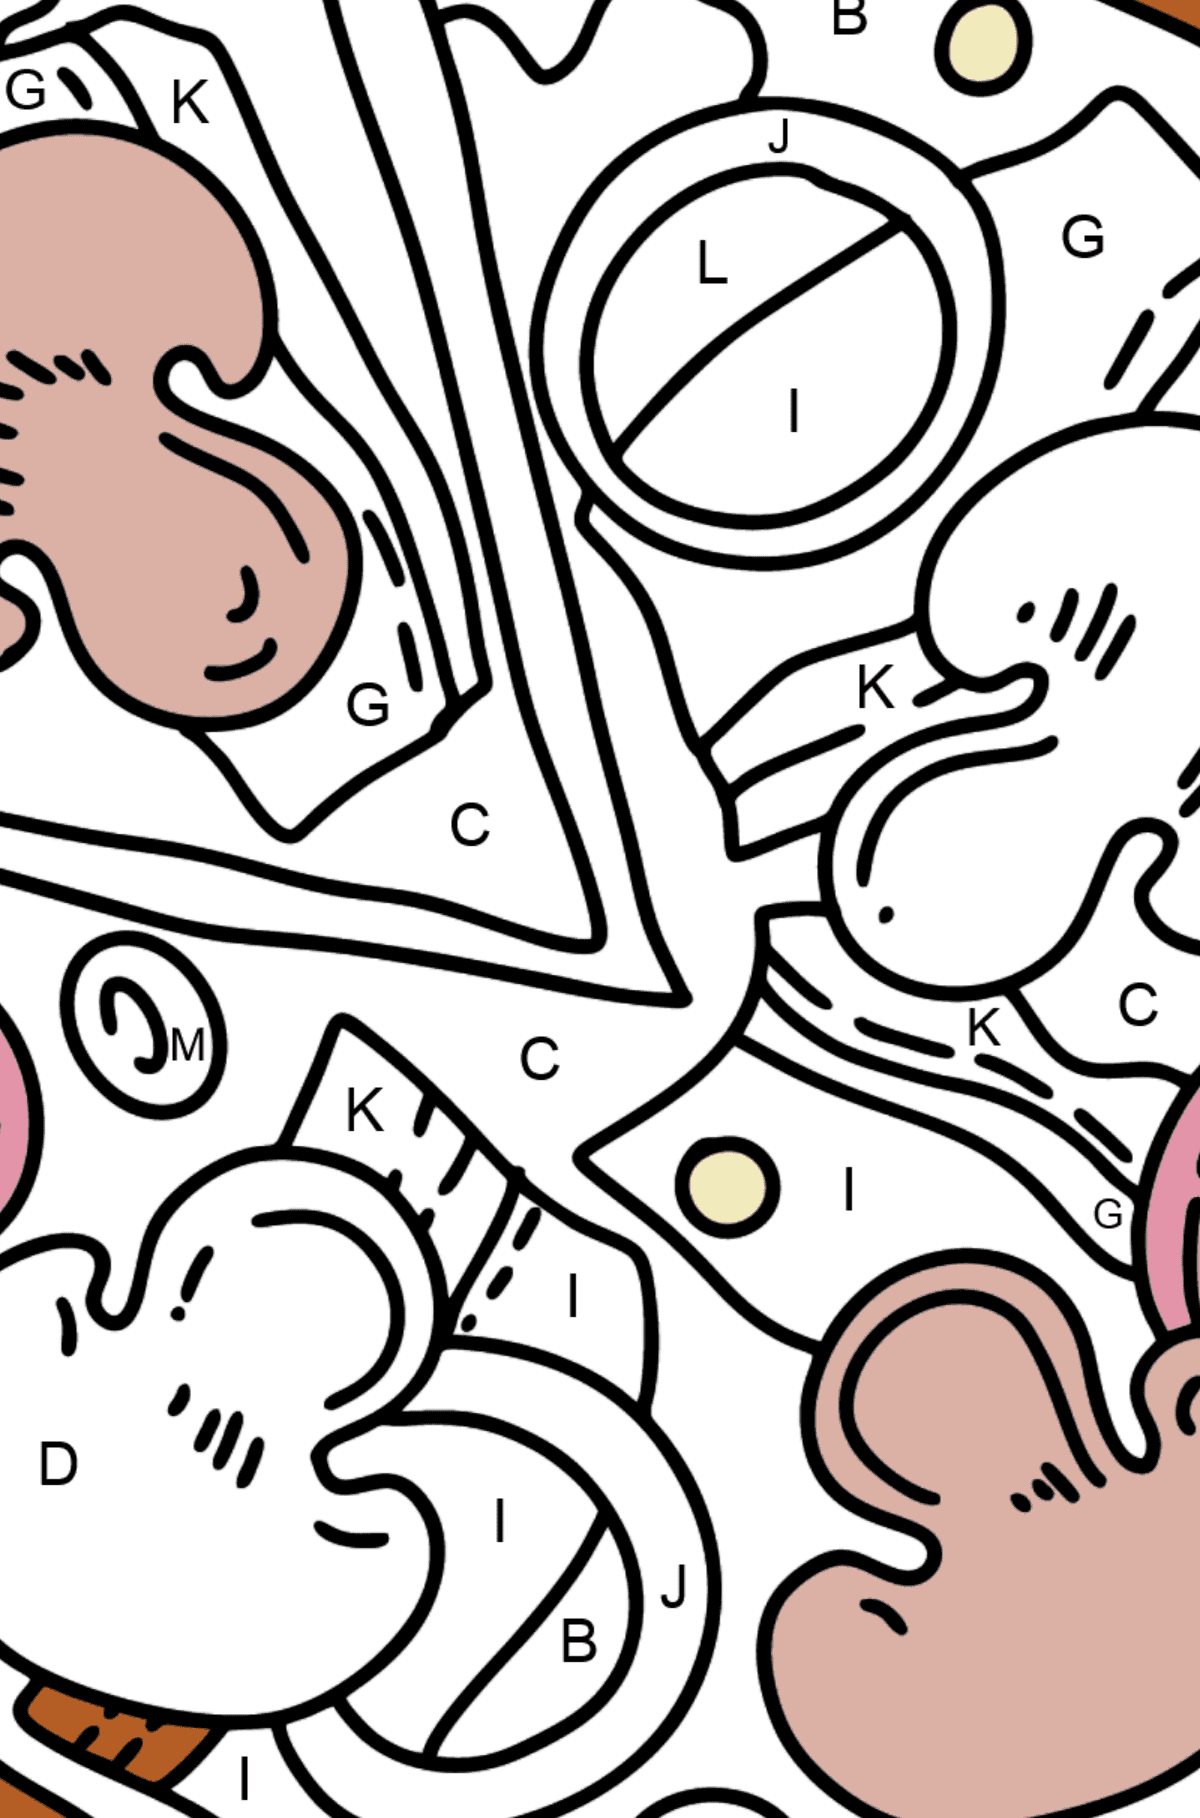 Pizza with Mushrooms coloring page - Coloring by Letters for Kids